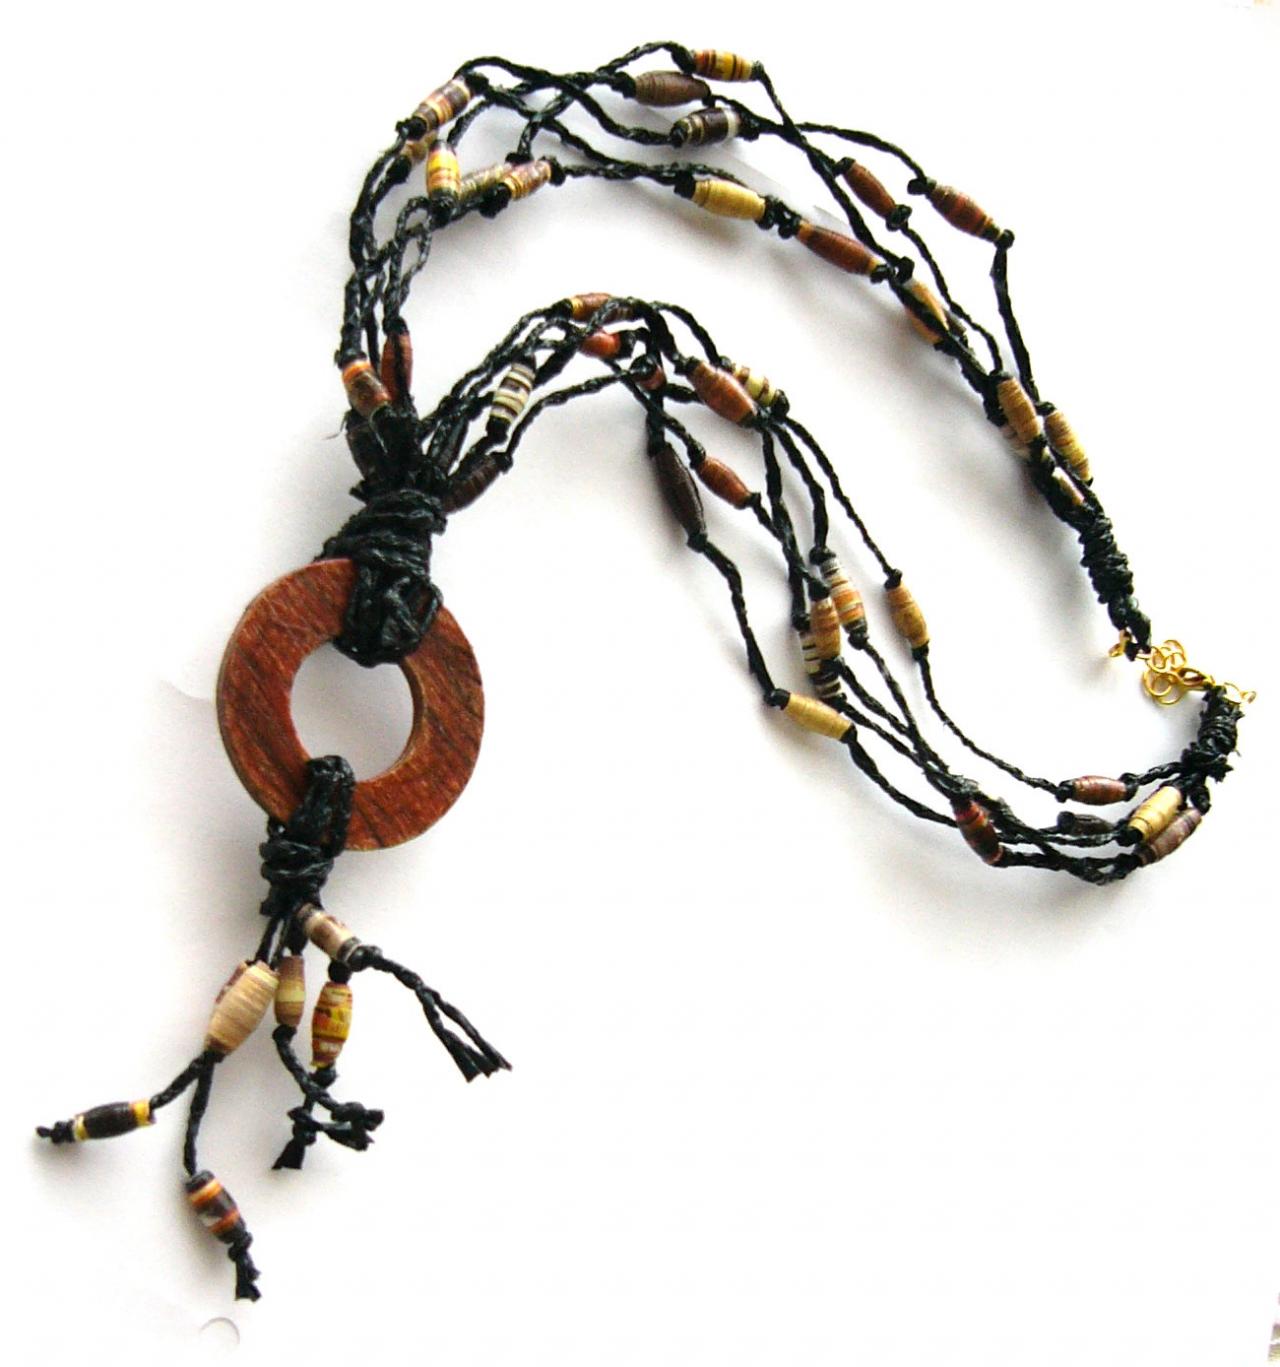 Brown & Black Statement Necklace Made Of Paper Beads And Recycled Plastic Bags, Eco-friendly, Upcycled Jewelry, Boho, Rustic, Natural